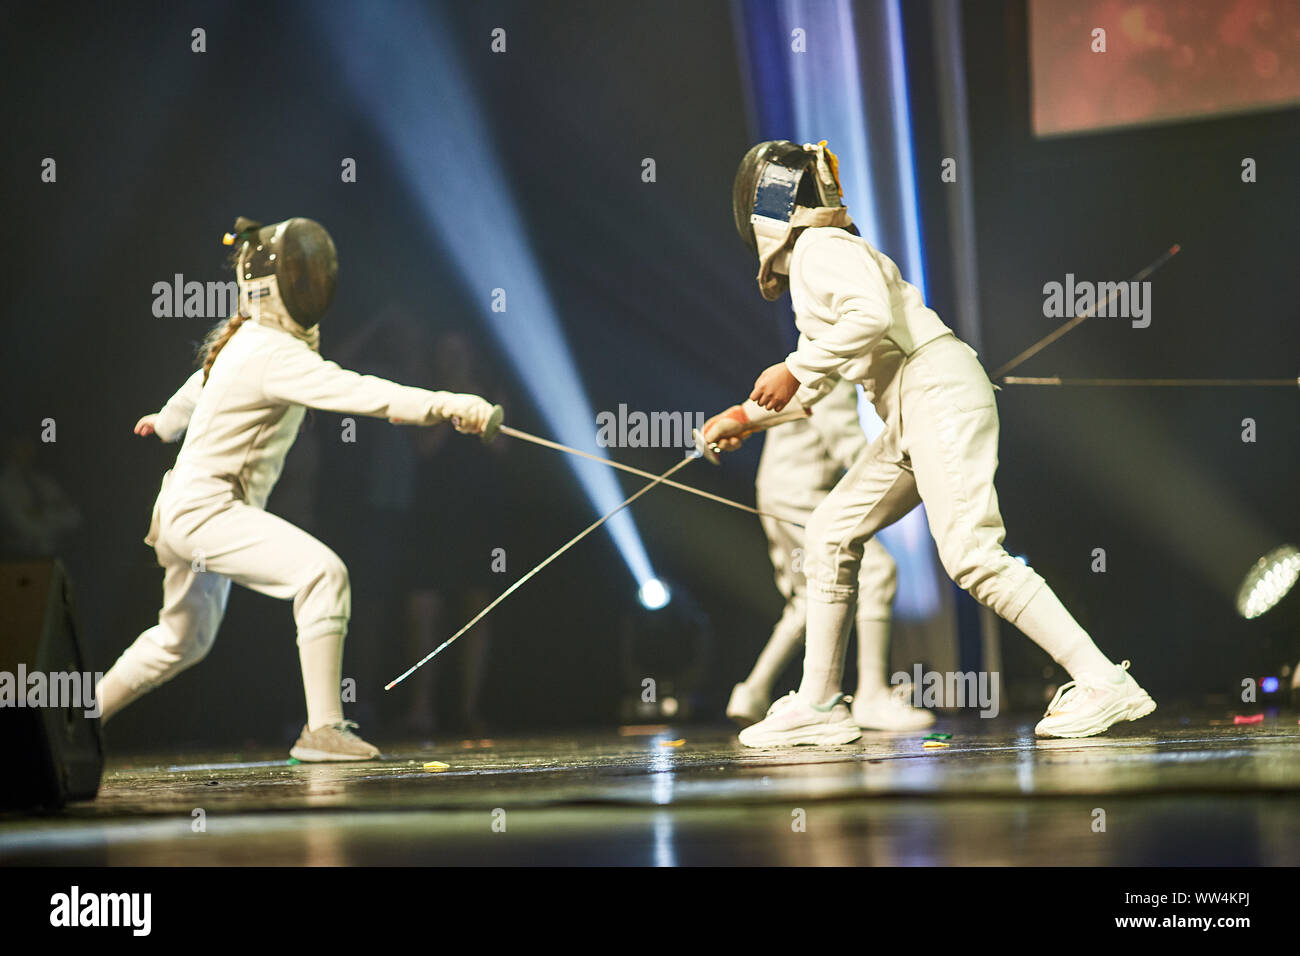 Junior Girls at a foil fencing athletes fight on professional sports arena with spectators and lens-flares Stock Photo